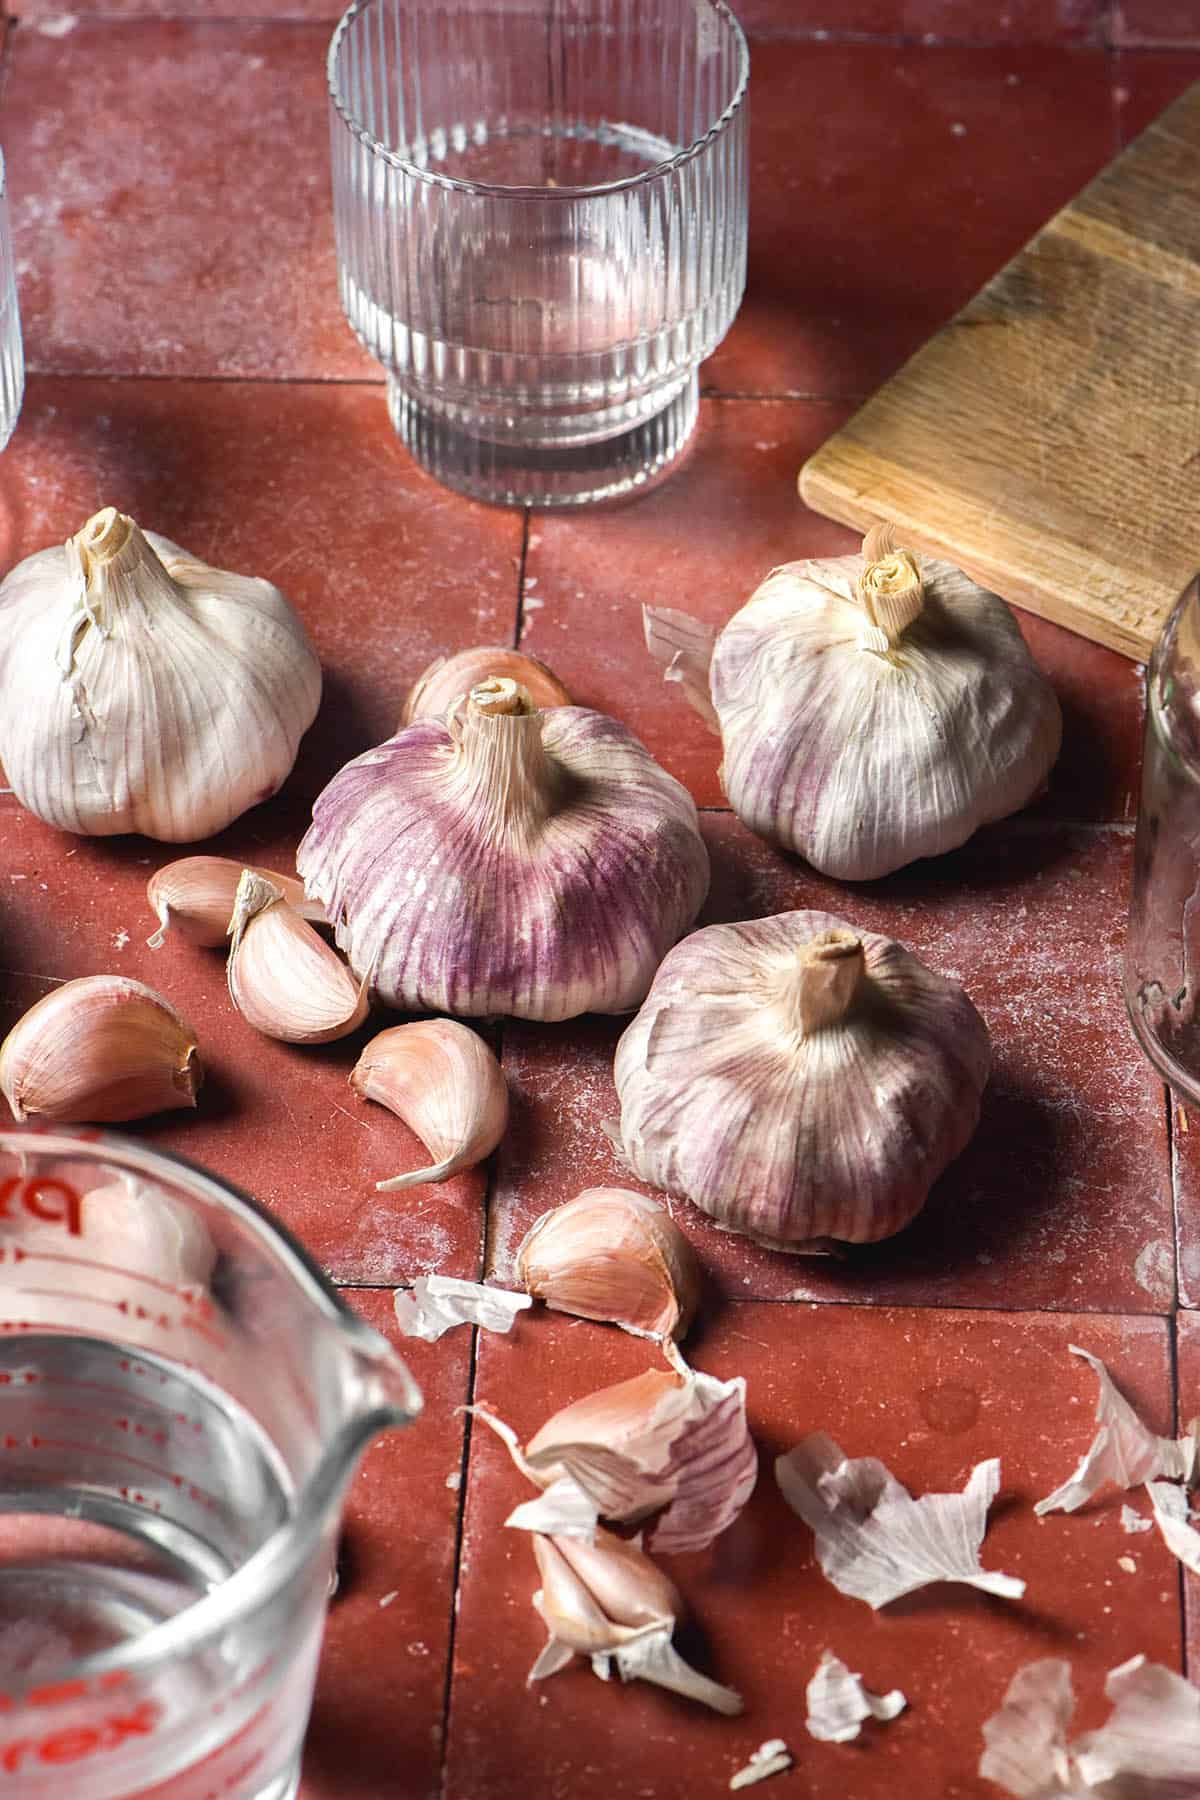 An aerial image of purple and white heads and cloves of garlic arranged casually on a terracotta tile backdrop. The garlic is surrounded by a chopping board, glasses of water and white vinegar for pickling